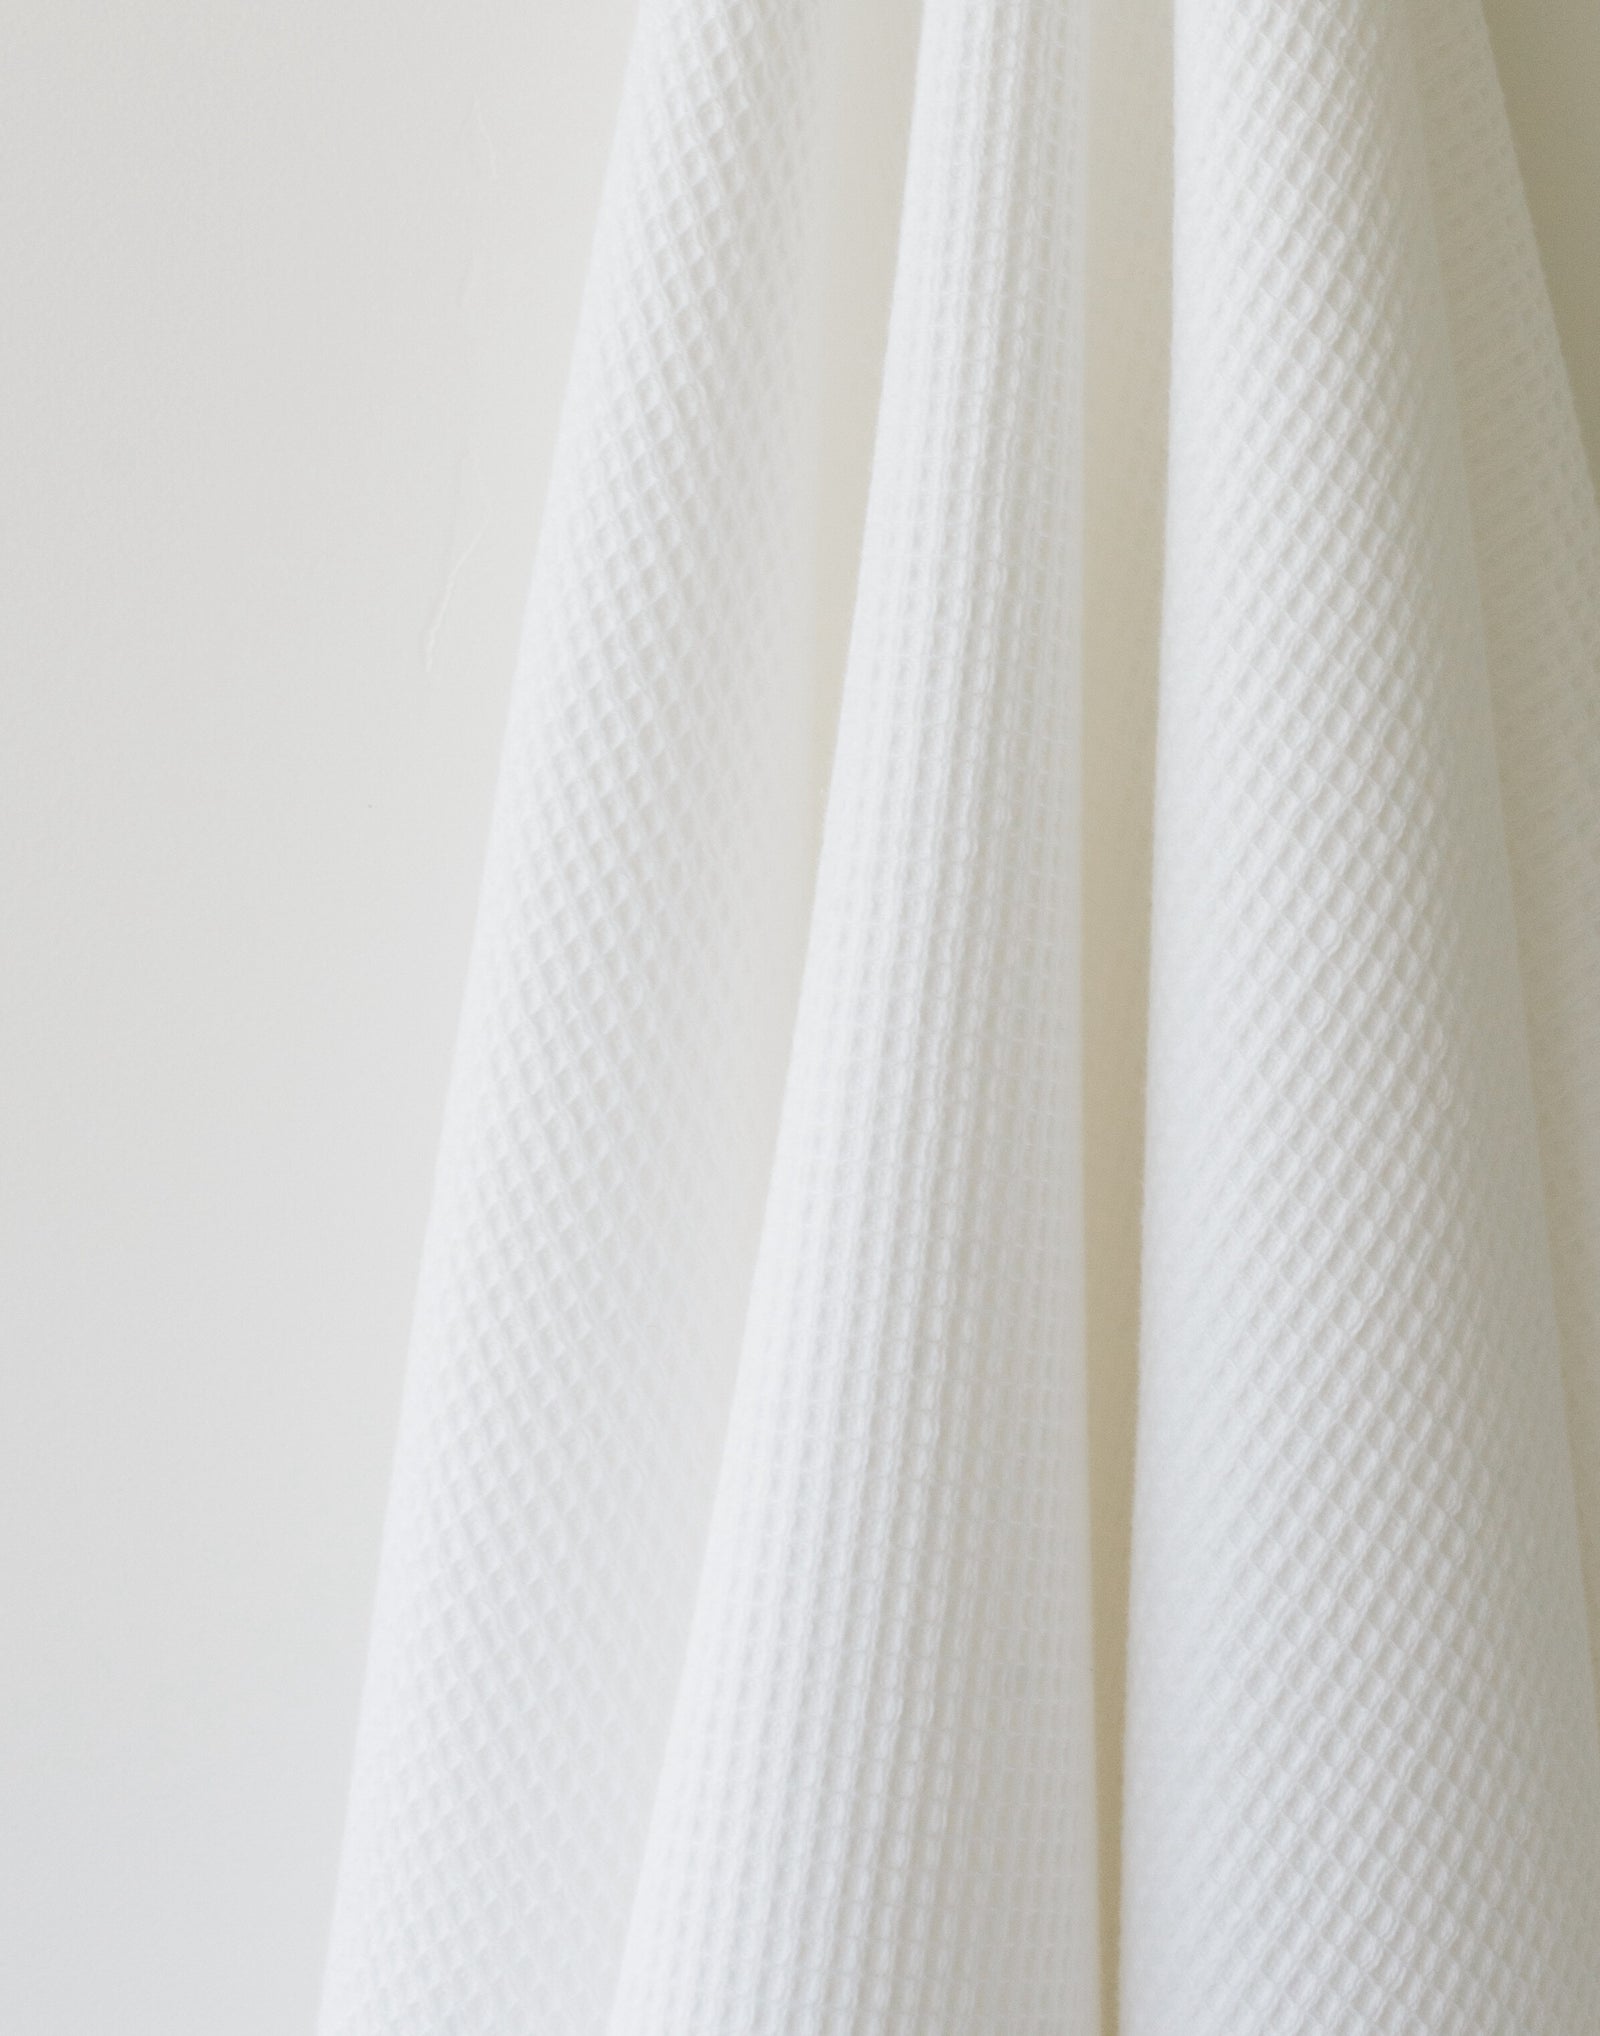 Waffle Bath Towel in the color White. Photo of White Waffle Bath Towel taken as a close up of the White Waffle Bath Towel. The picture shows only the towel 